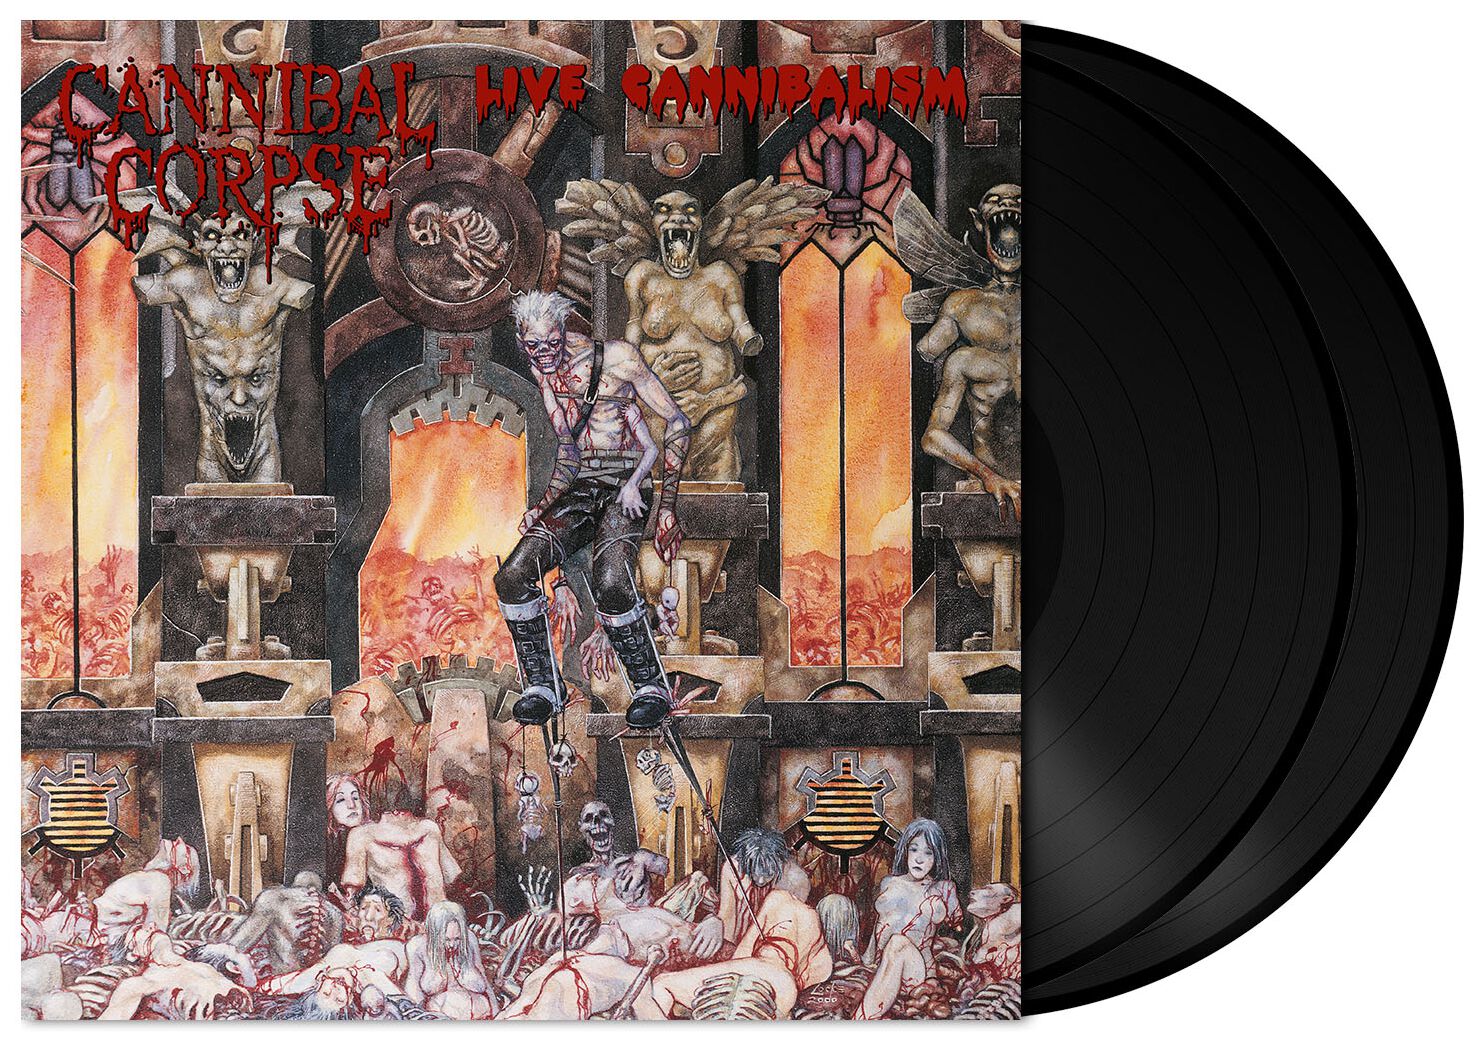 Live Cannibalism von Cannibal Corpse - 2-LP (Re-Release, Standard)